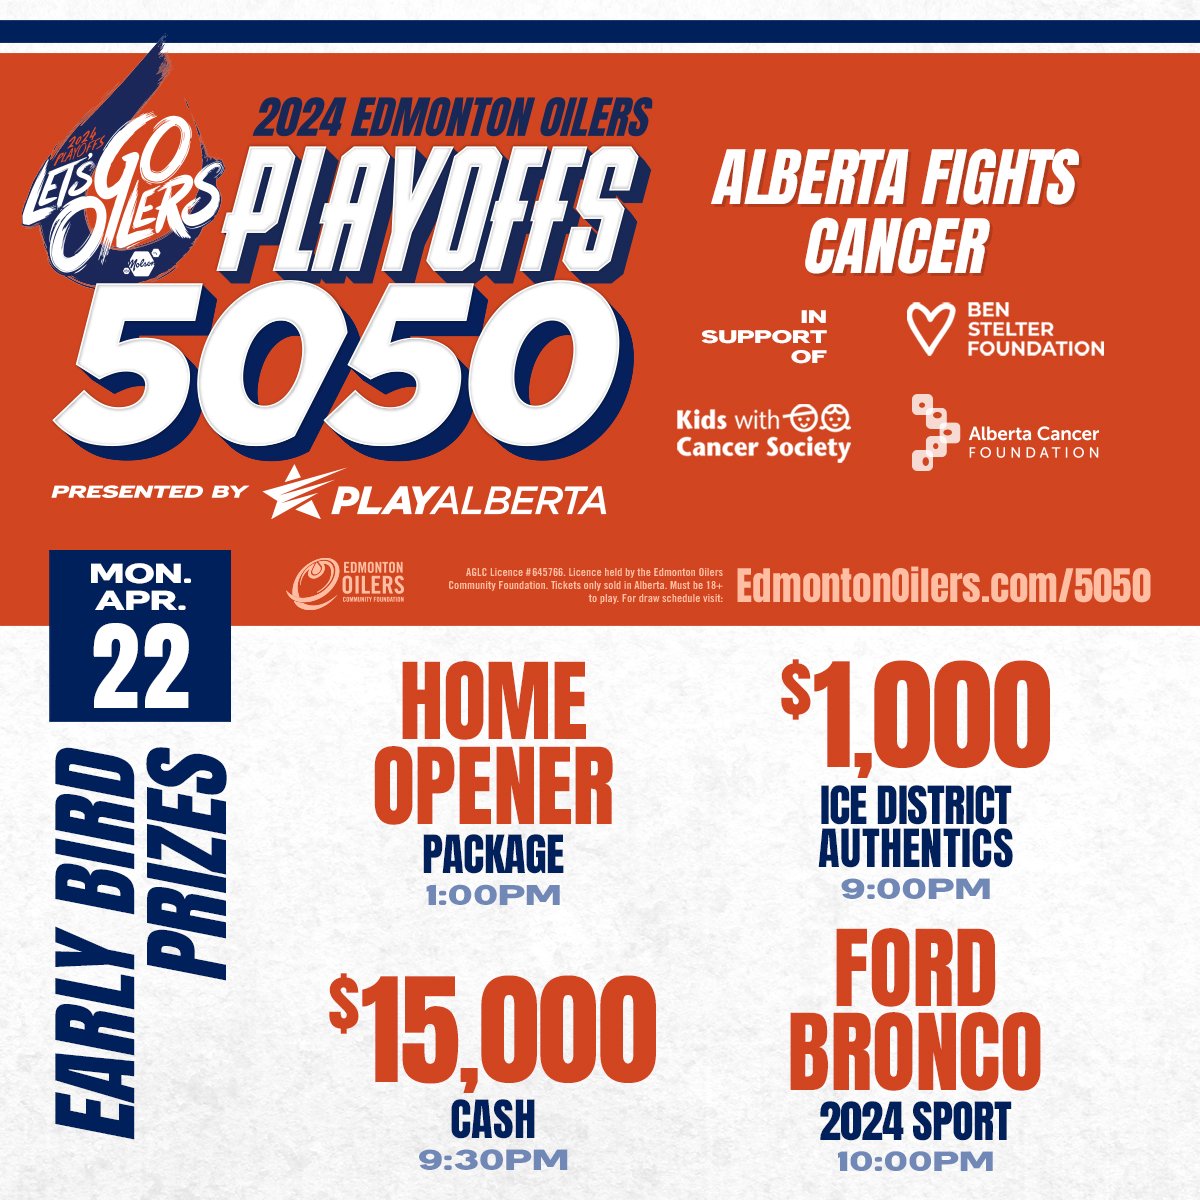 Congrats to the holder of #Oilers 50/50 ticket B-103512835 who's won a home opener package with today's first early-bird draw! We still have $1,000 for @IceDistrictAuth, $15,000 cash & a Ford Bronco up for grabs PLUS the jackpot is over $1.45 million! 🎟 EdmontonOilers.com/5050tw